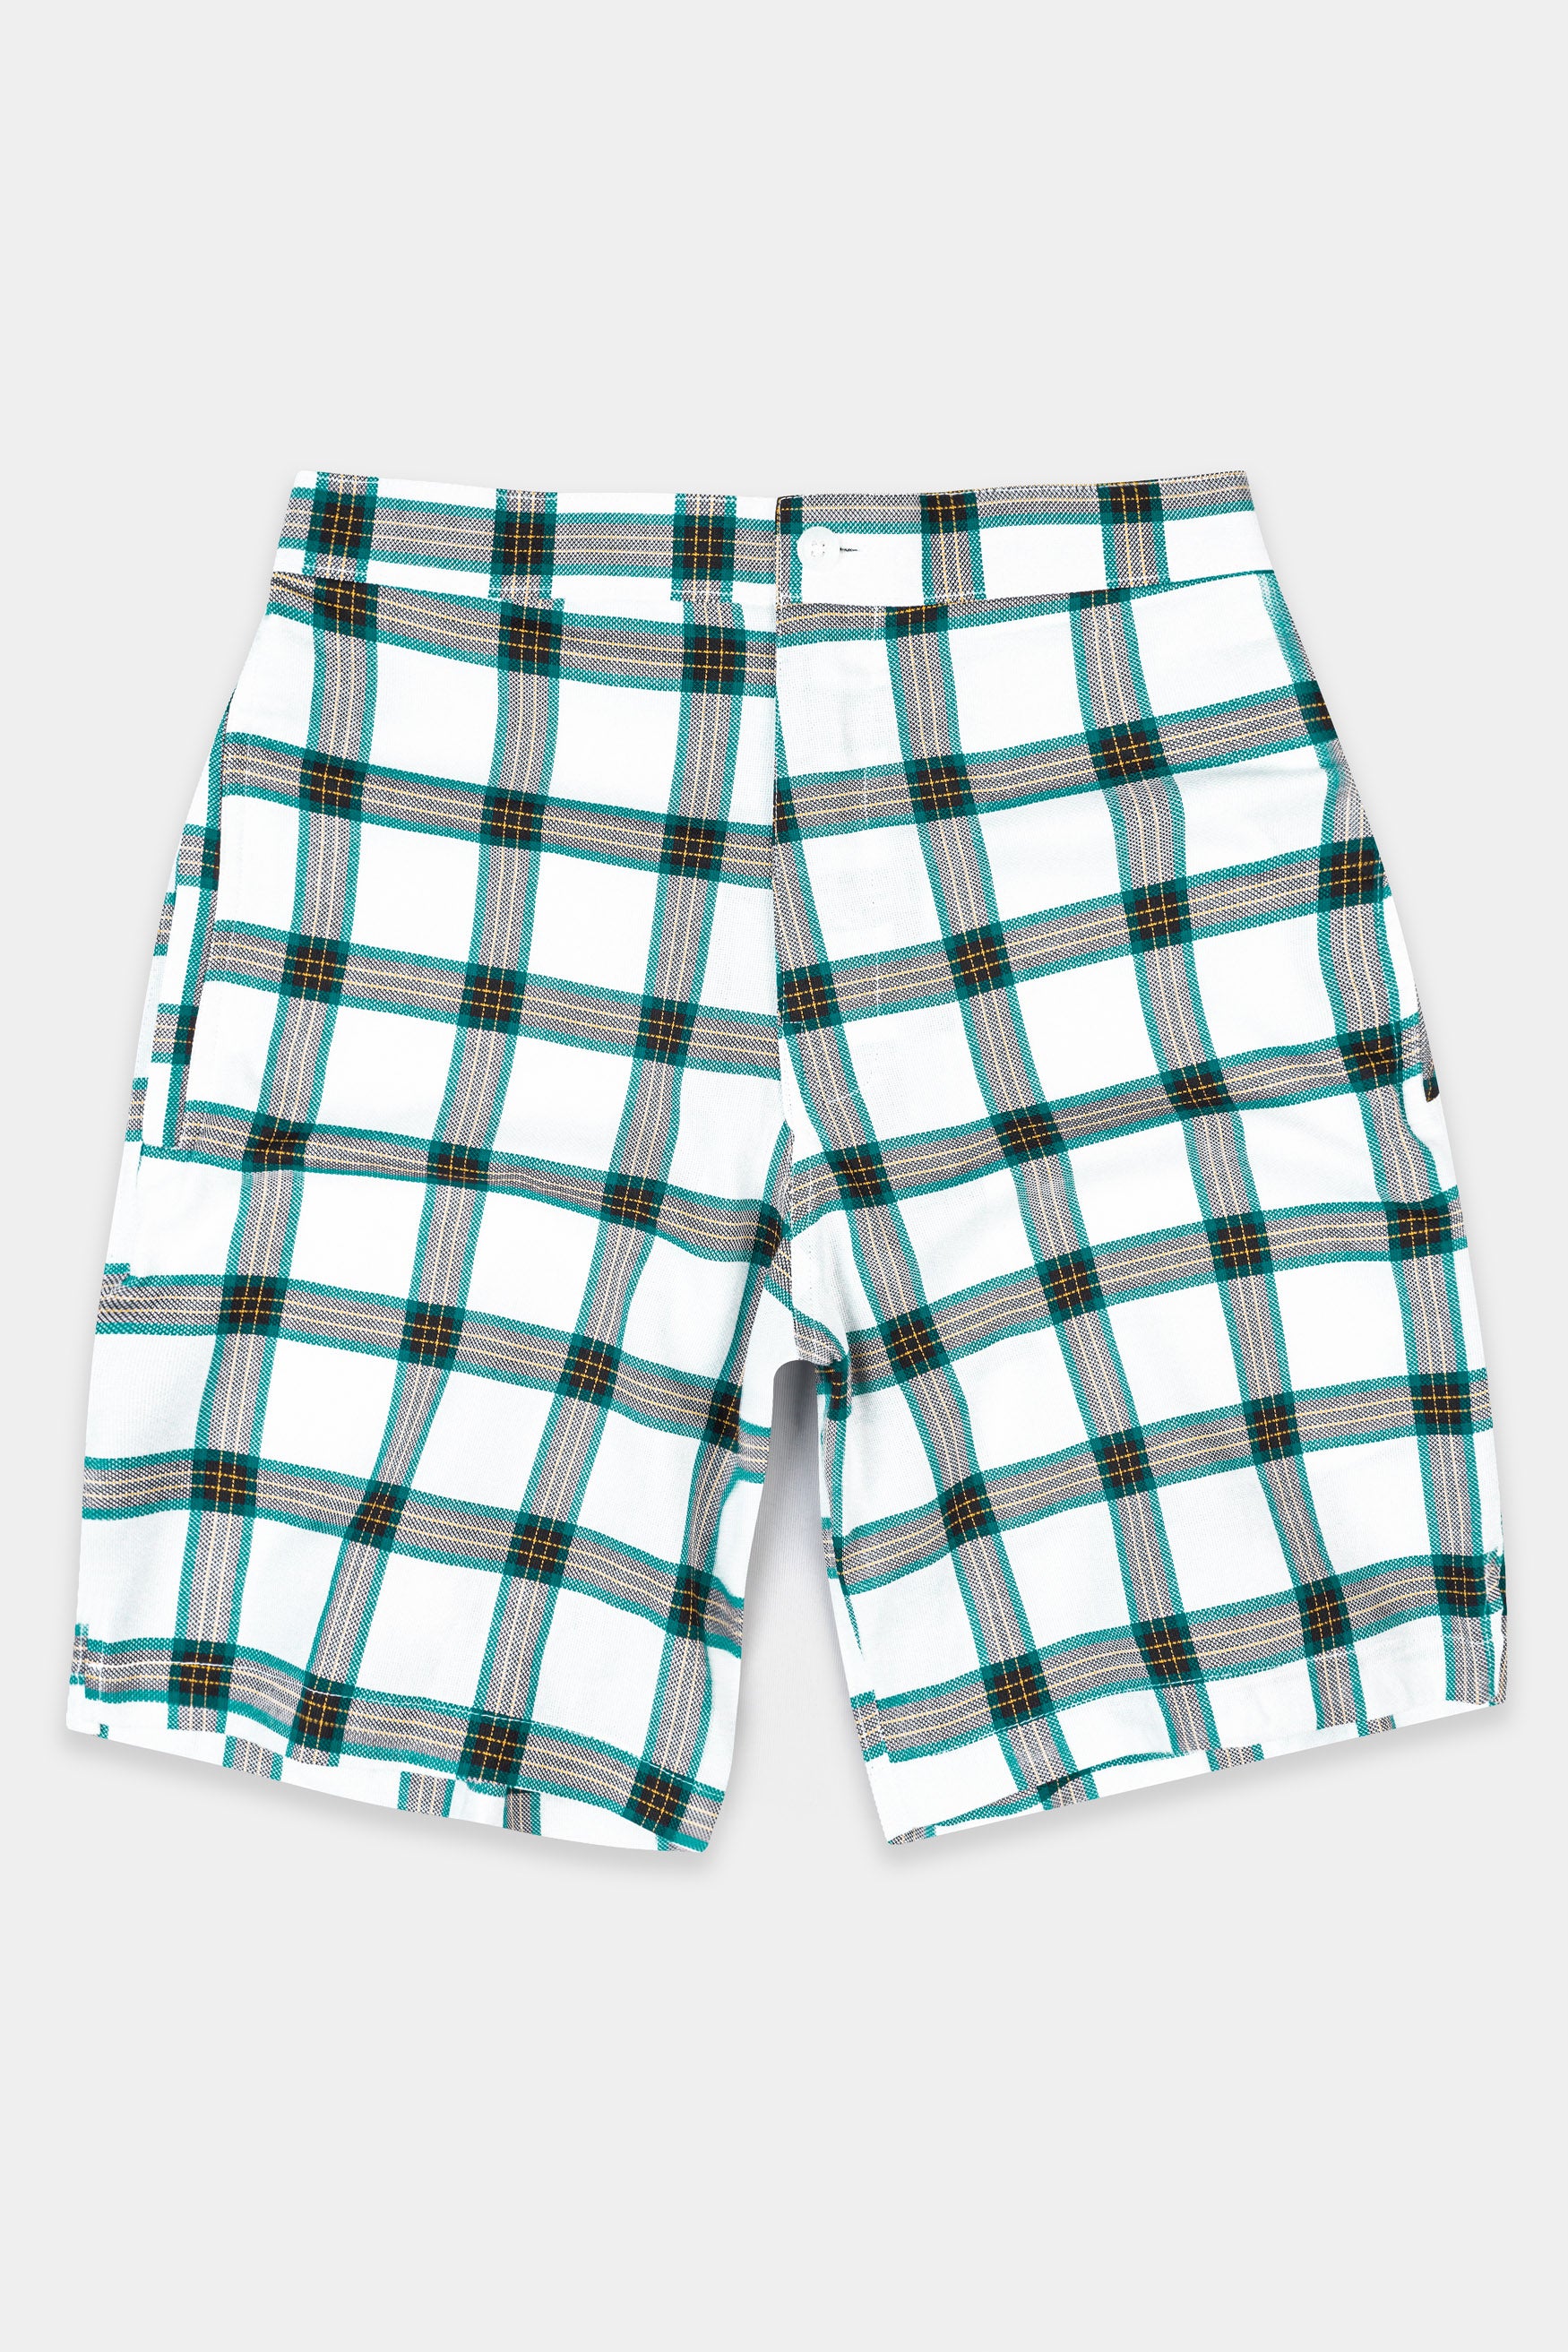 Bright White with Teal Blue Checkered Dobby Textured Giza Cotton Shorts SR360-28, SR360-30, SR360-32, SR360-34, SR360-36, SR360-38, SR360-40, SR360-42, SR360-44